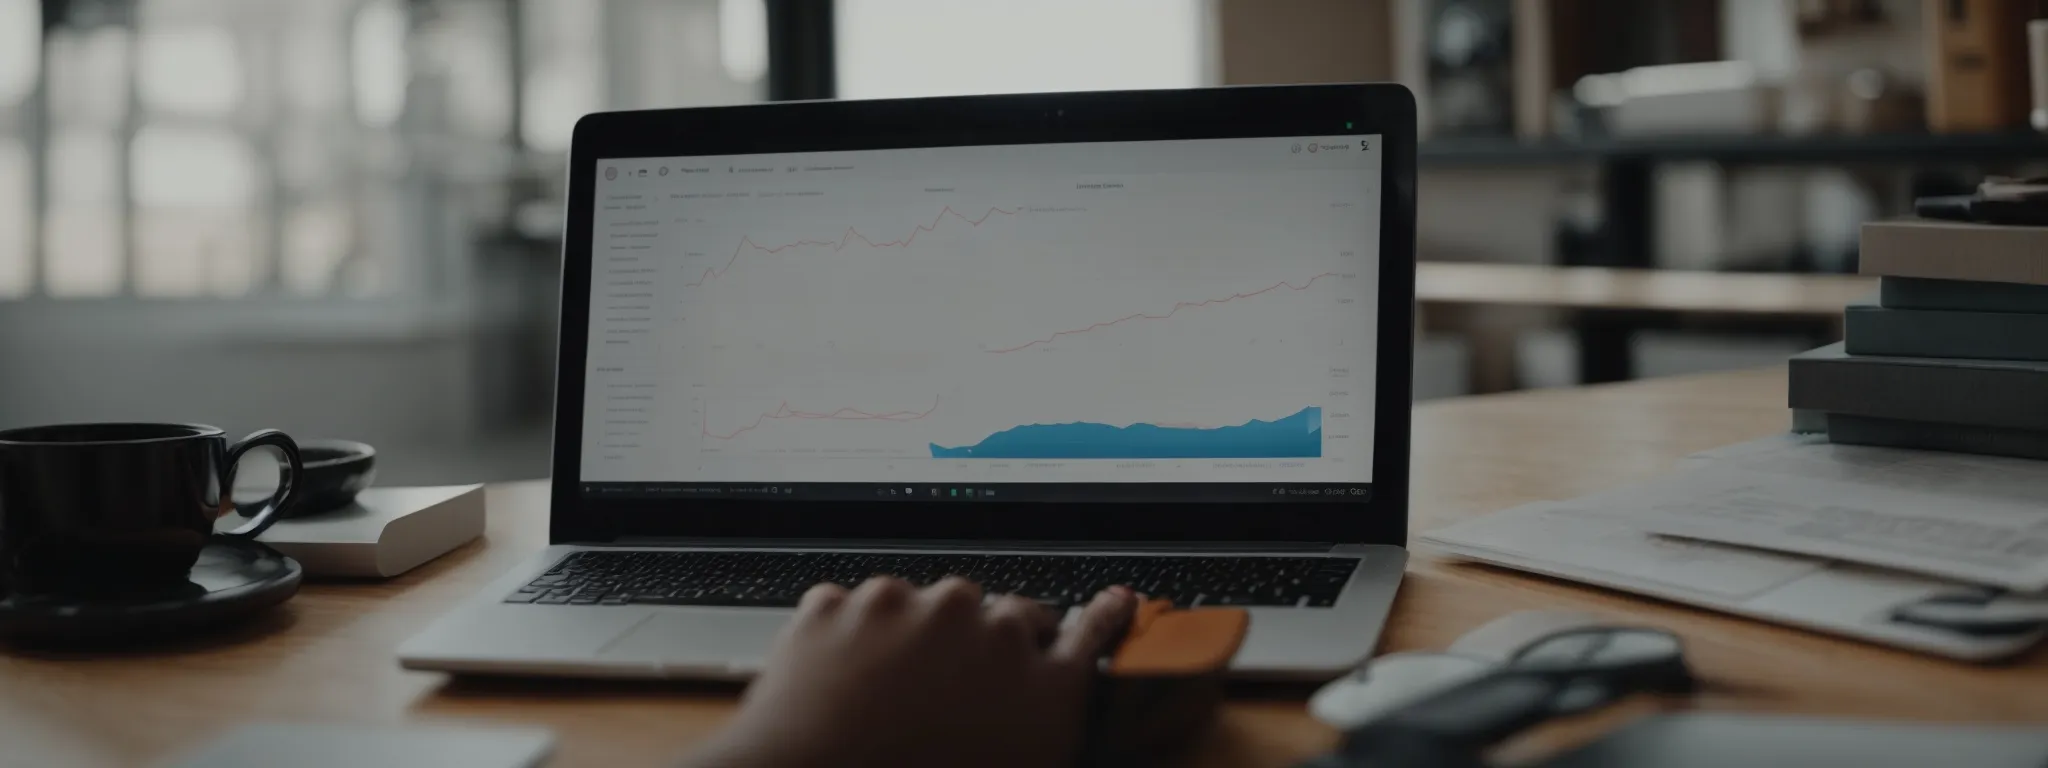 a person using a laptop to analyze a graph showing online sales growth.